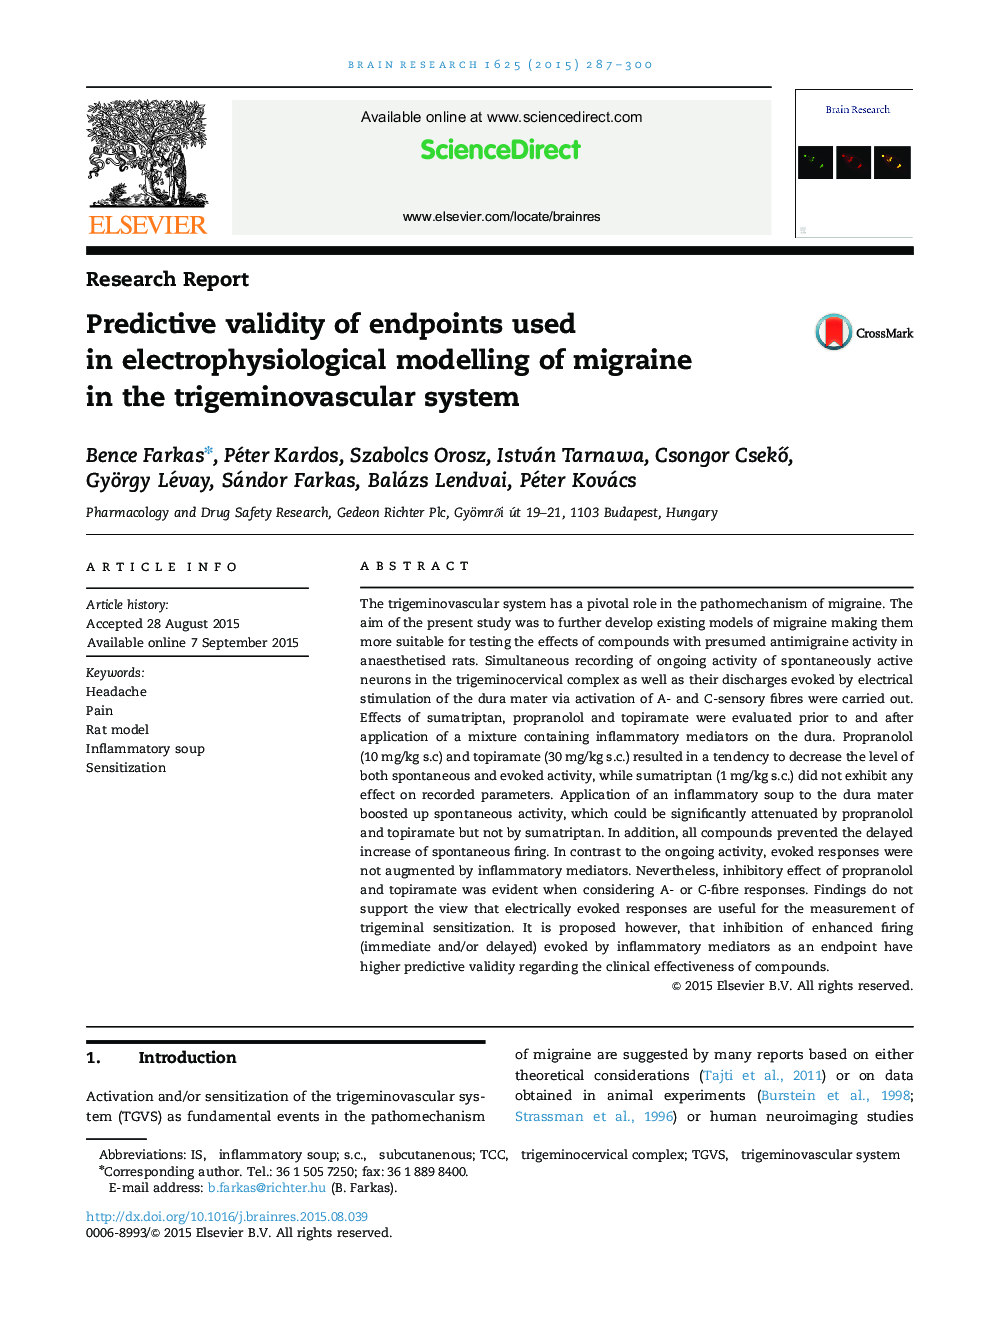 Research ReportPredictive validity of endpoints used in electrophysiological modelling of migraine in the trigeminovascular system